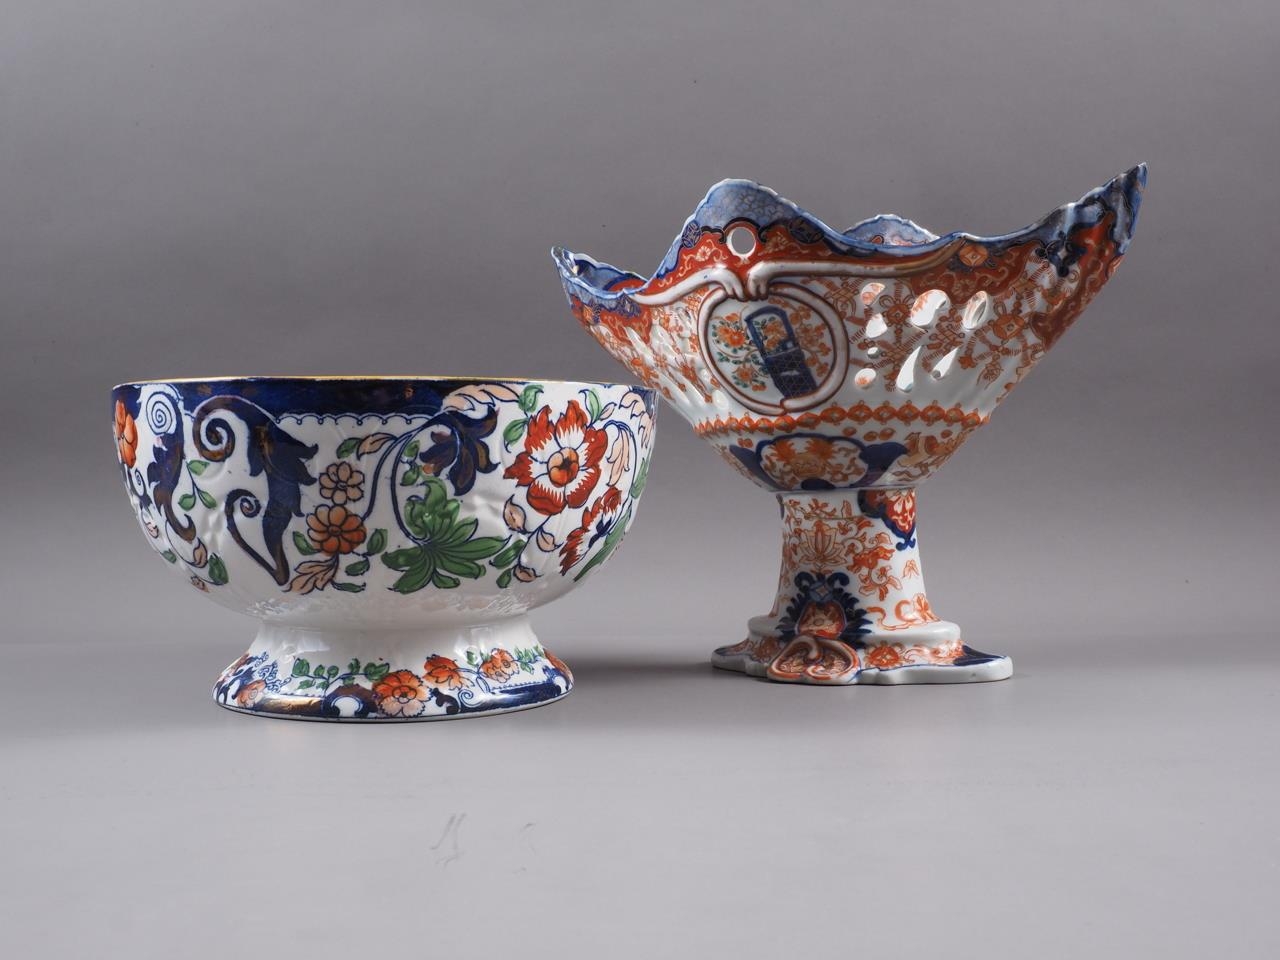 A 19th century Minton "Amherst Japan" pattern bowl, 9 1/2" dia, and an Imari openwork stand, 9 high,